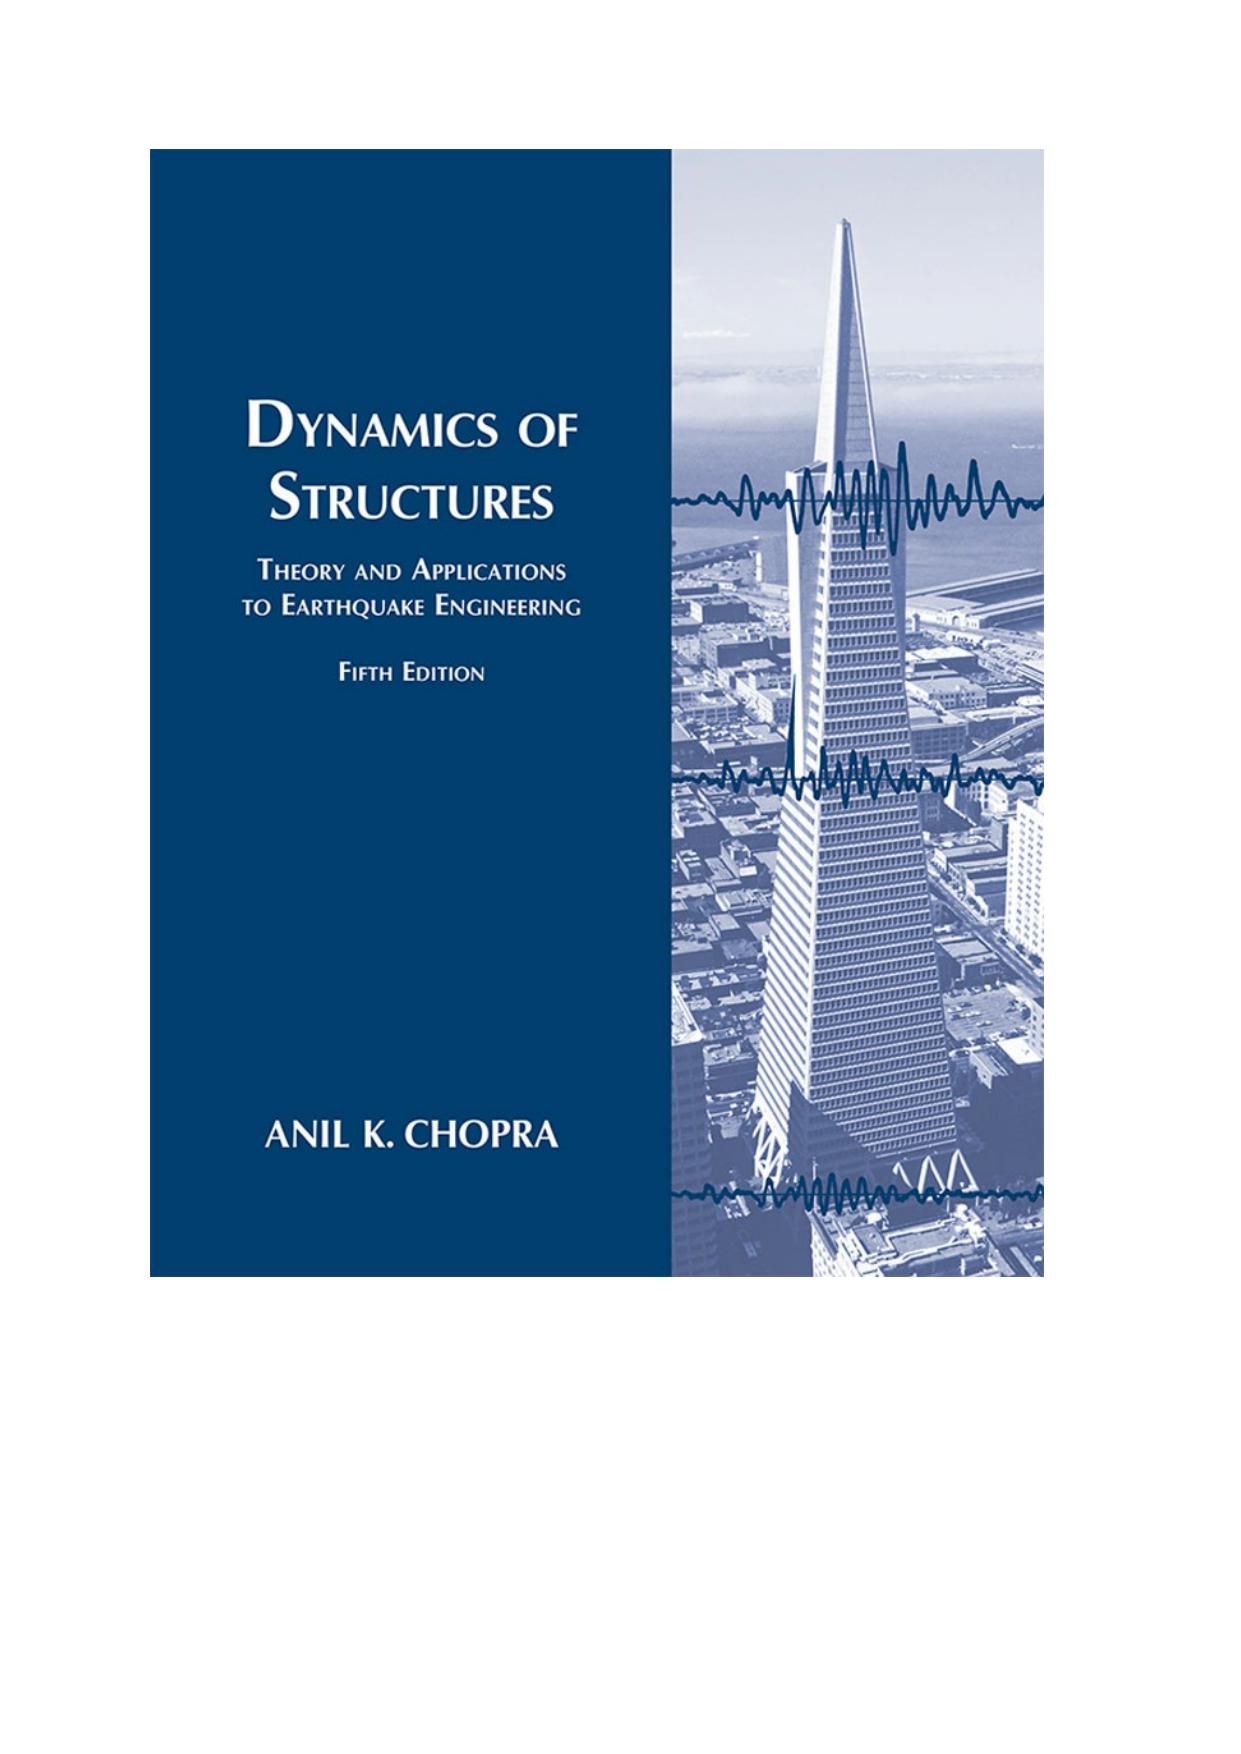 Dynamics of Structures 5th by Anil K. Chopra - Vitalsource Download.jpg